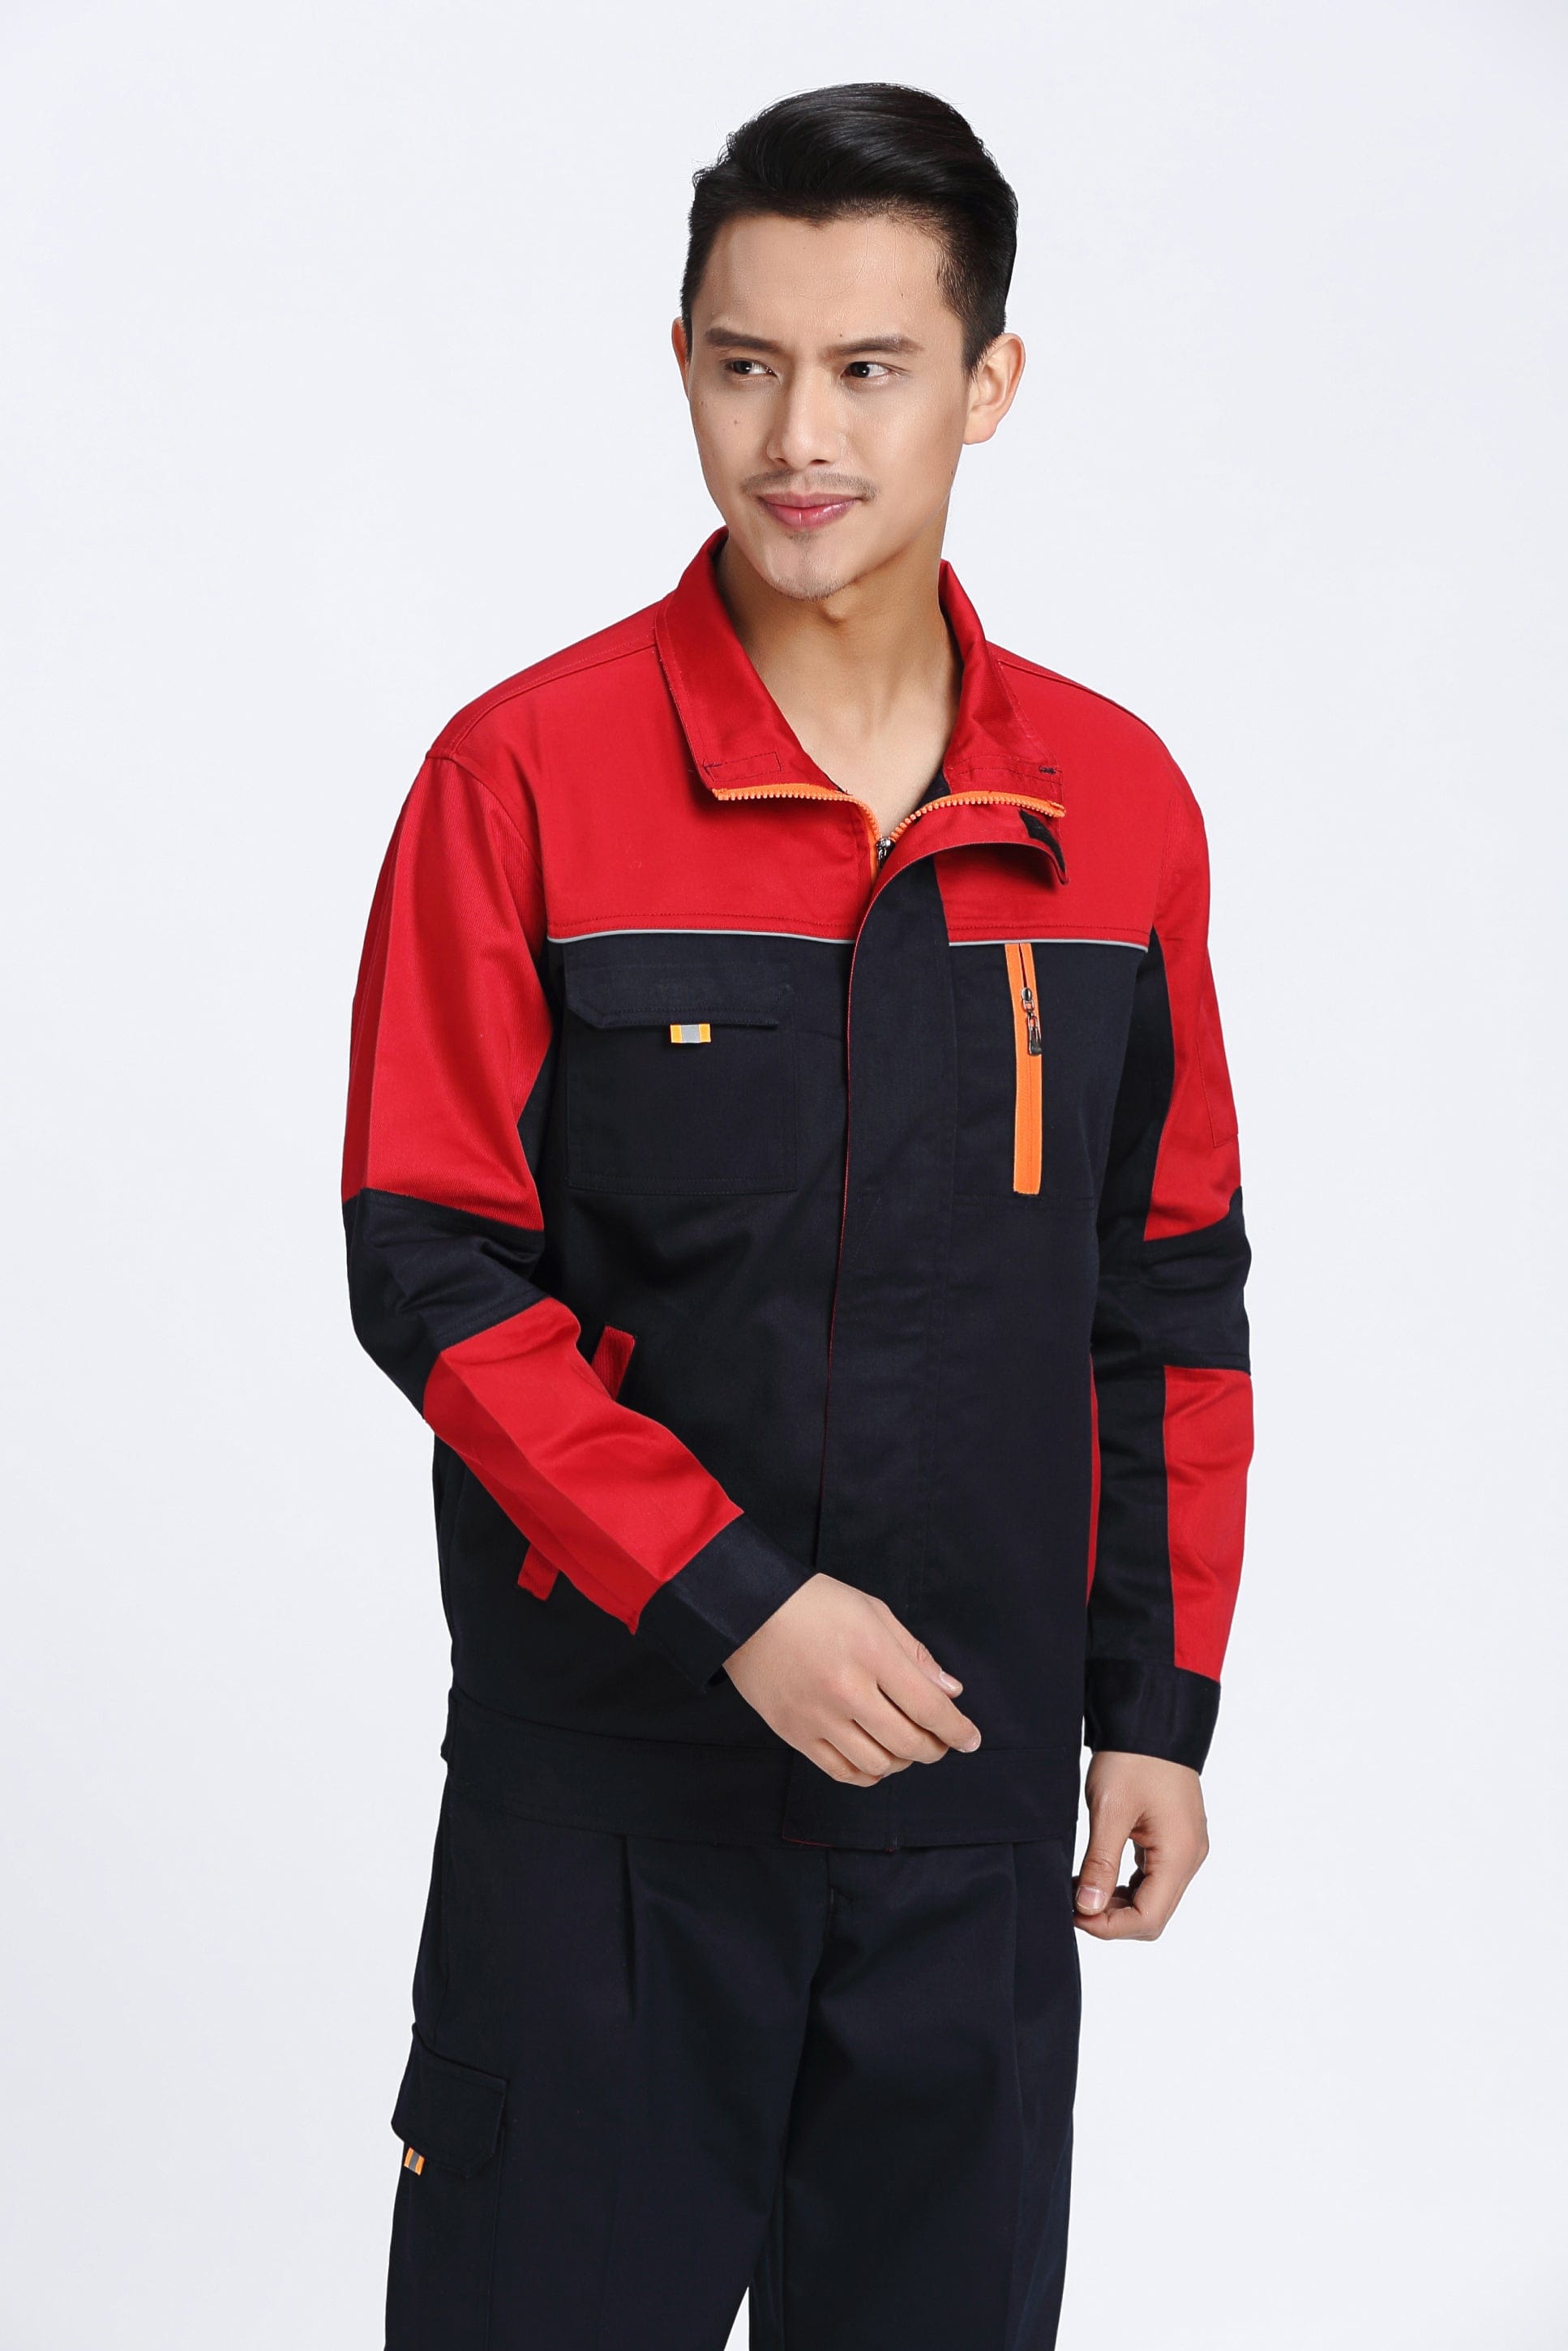 Corals Trading Co. 可樂思百貨商行 涤棉 Spring and Autumn Long Sleeve Polyester-Cotton Workwear SD-W2503